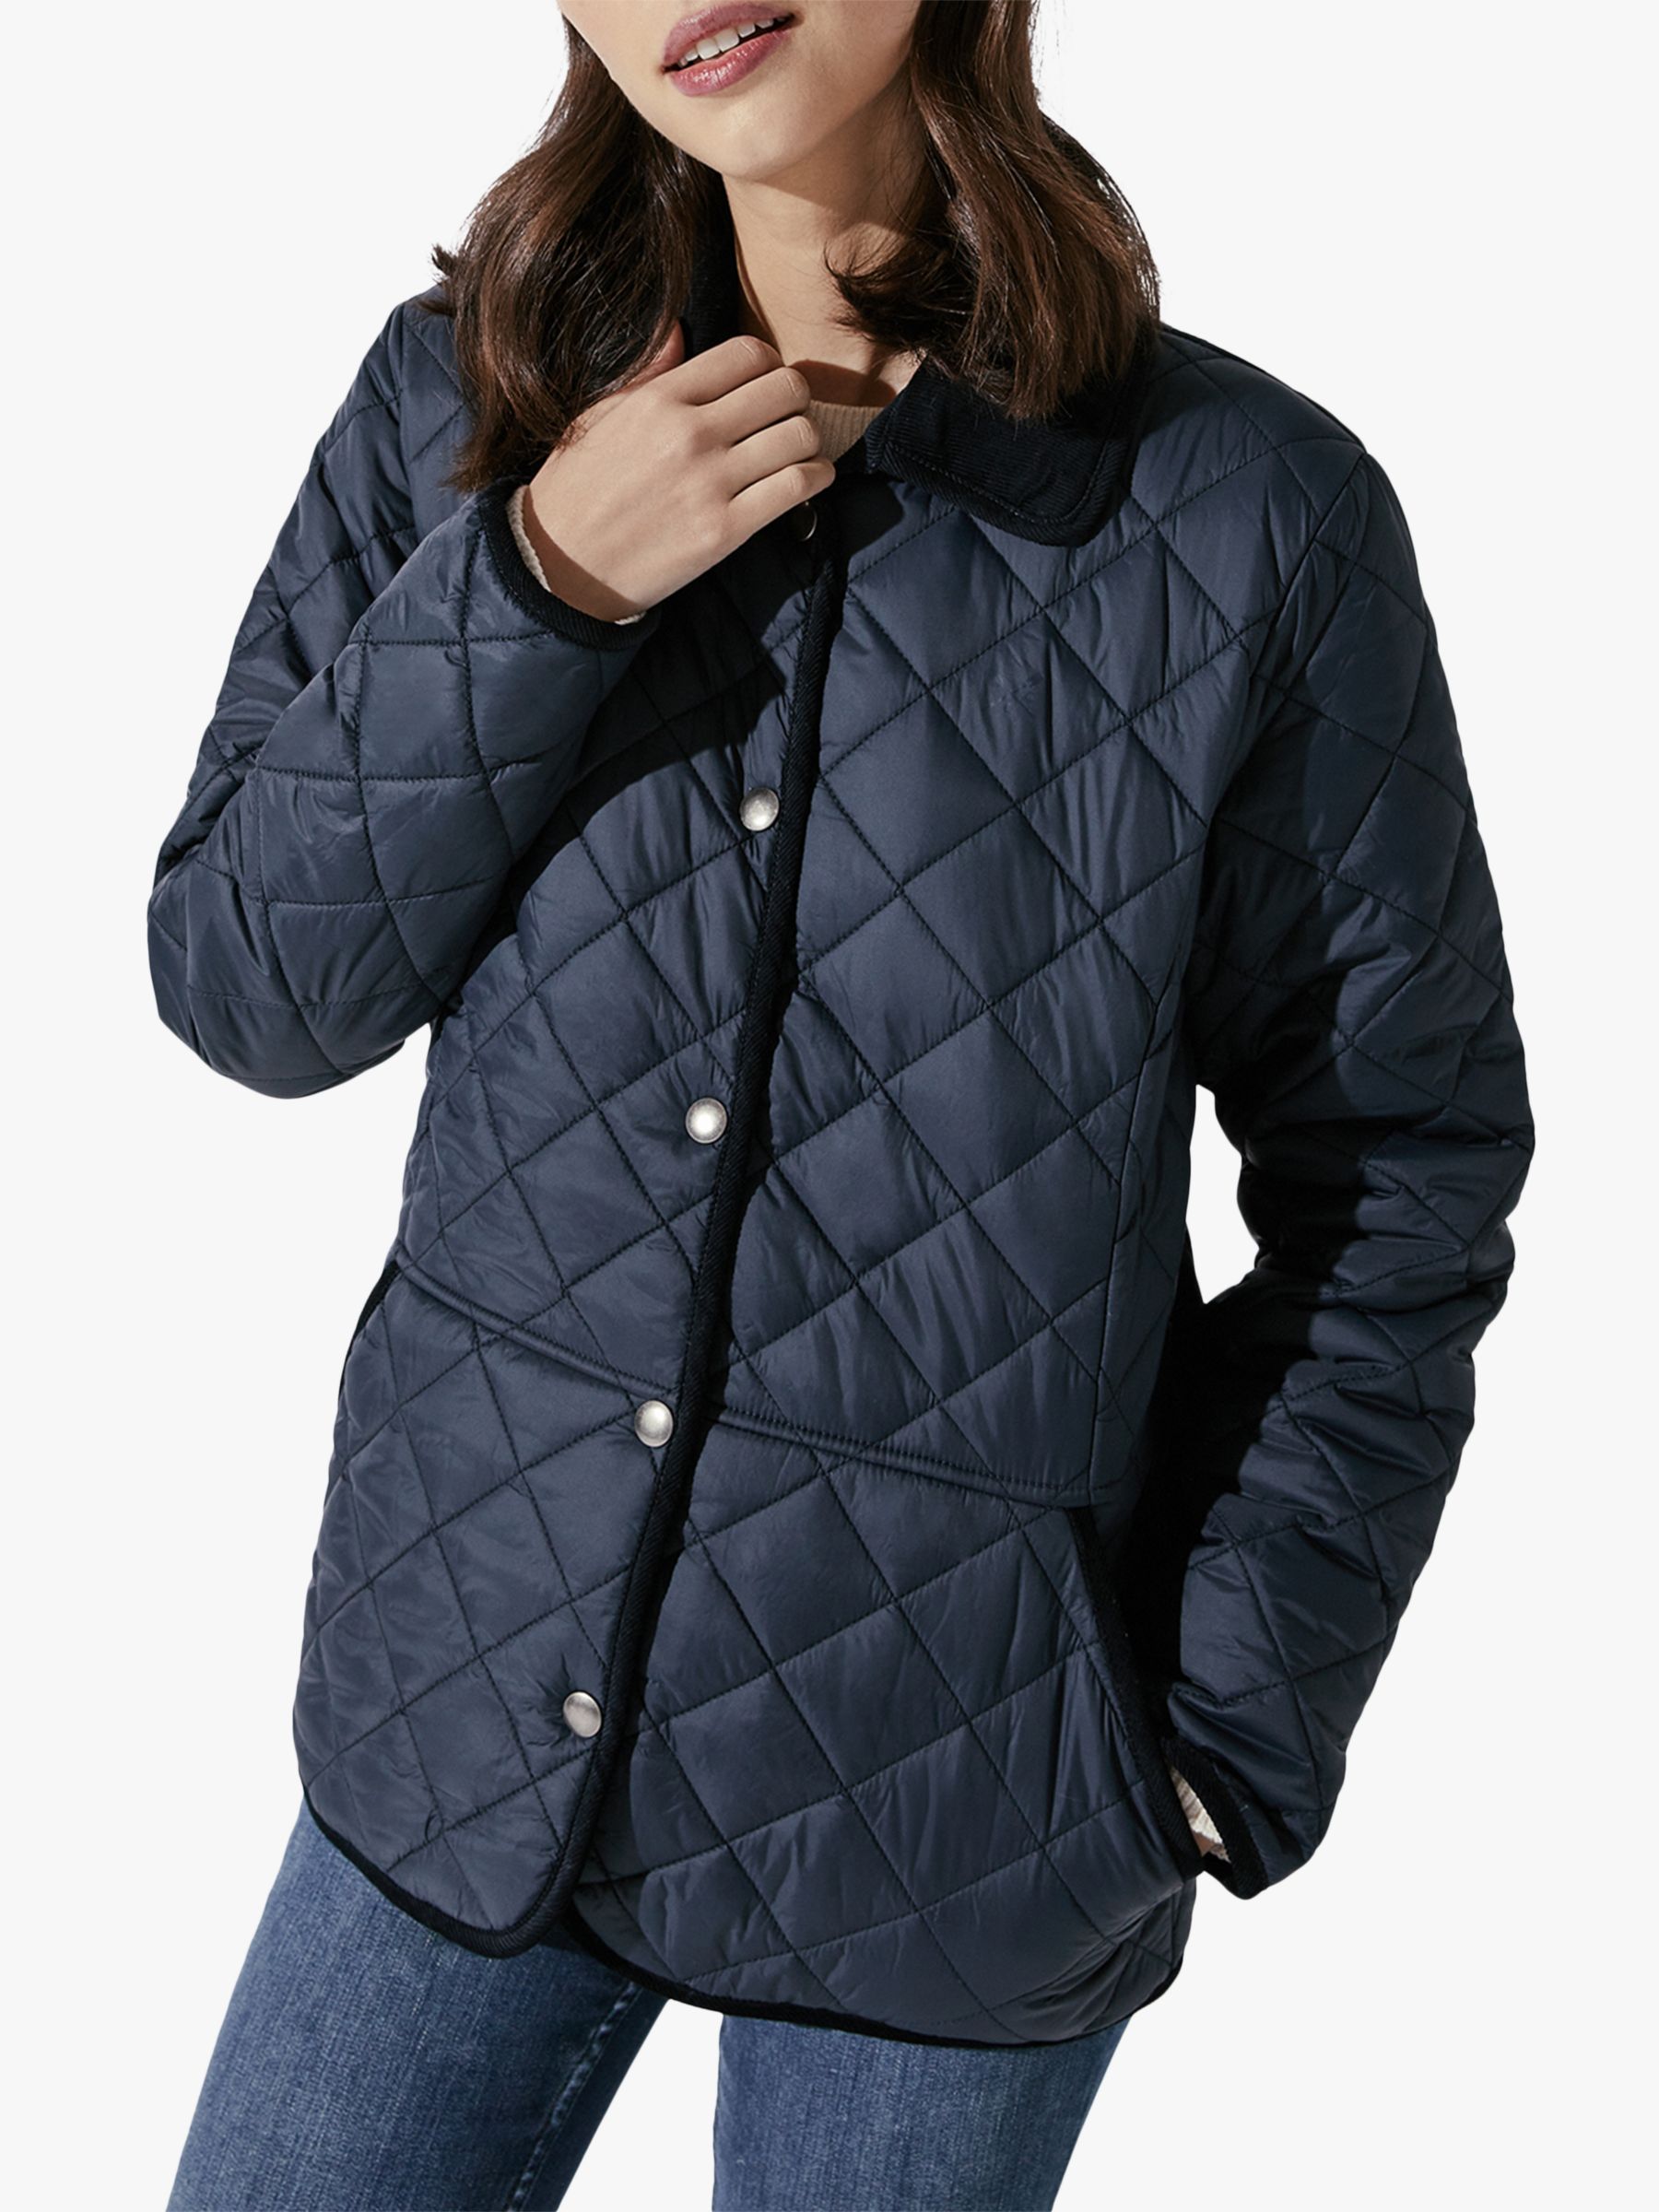 Crew Clothing Quilted Jacket, Navy, 8